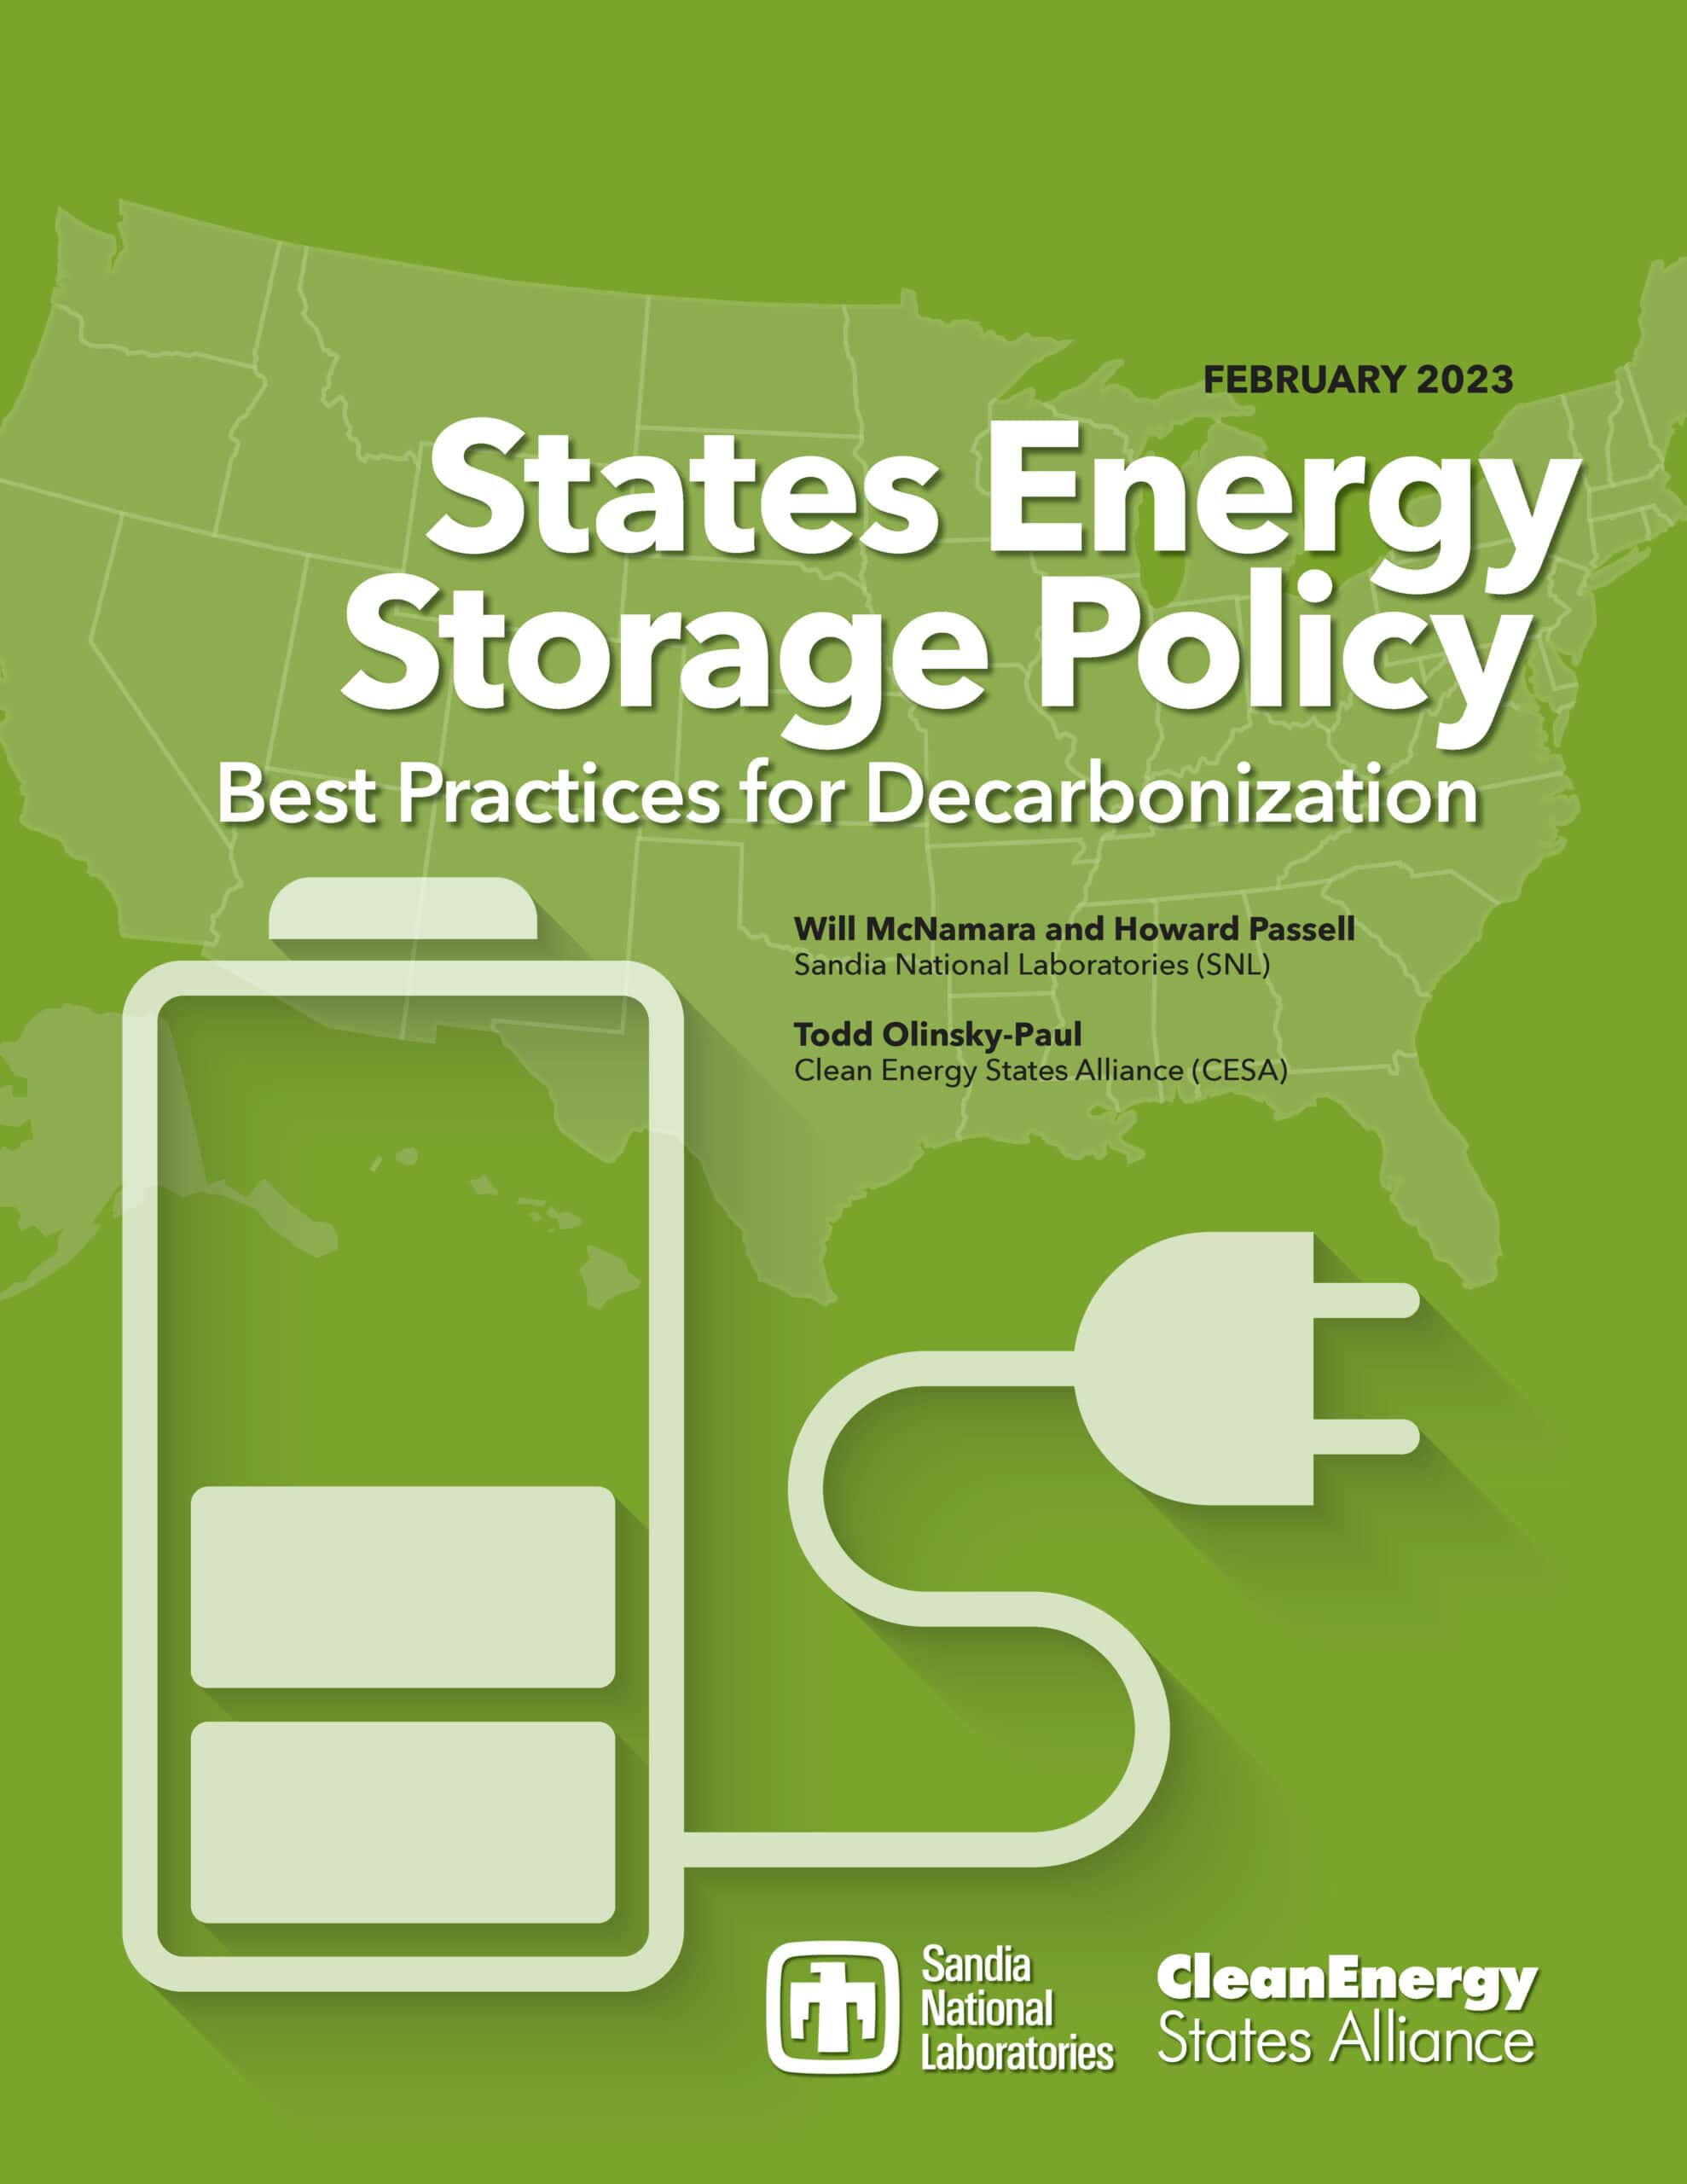 states-energy-storage-policy-best-practices-for-decarbonization